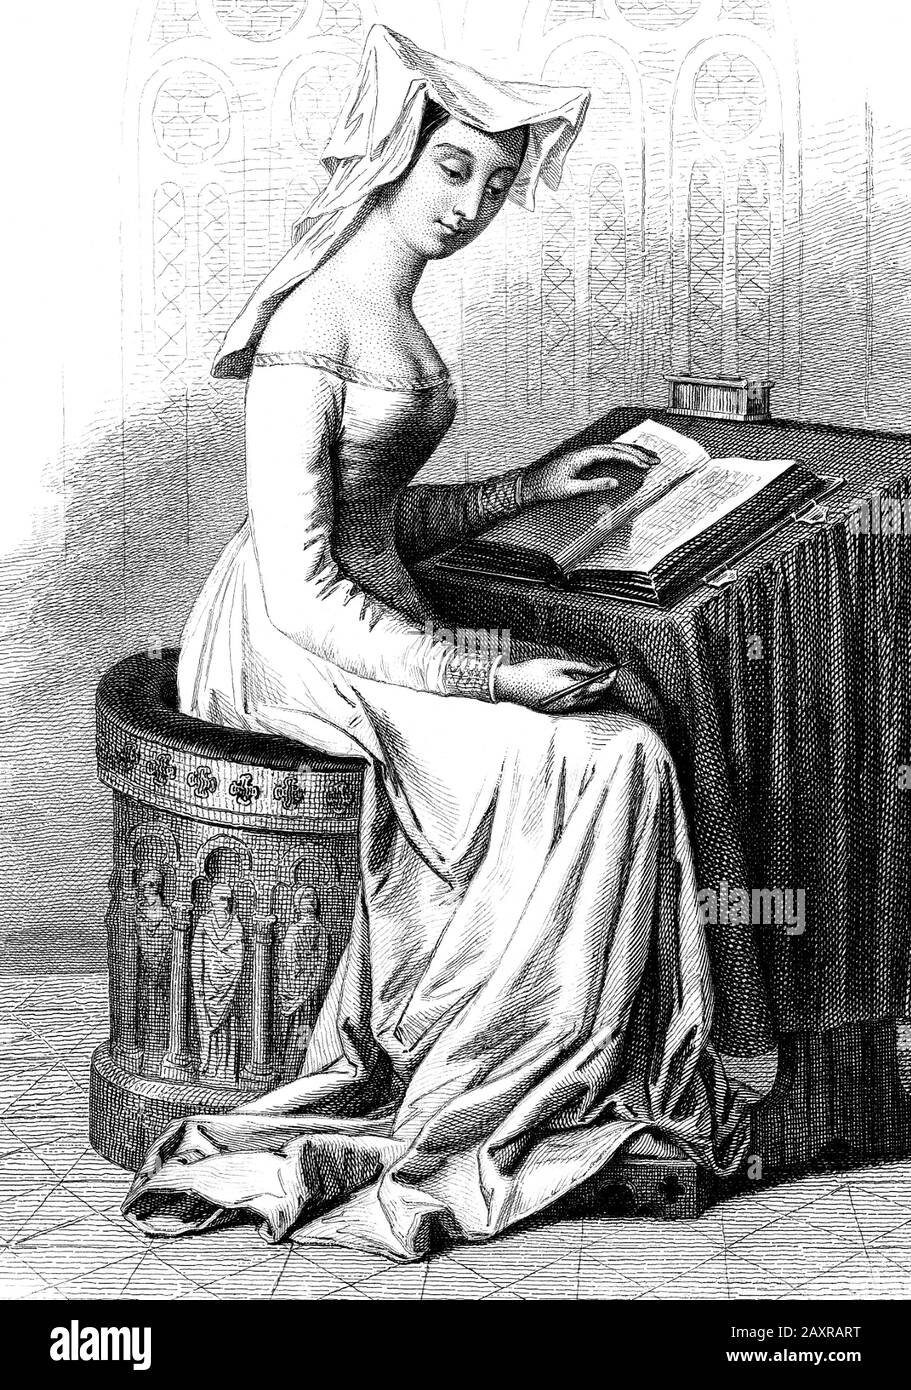 1400 ca , FRANCE: The italian-born french woman poet CRISTINA DA PIZZANO ( 1364 - 1430 ca ) aka CHRISTINE DE PIZAN or PISAN . Undentified engraver, pubblished in  1846 . Author at the court of King Charles VI of France . She is best remembered for defending women in The Book of the City of Ladies and The Treasure of the City of Ladies . Venetian by birth, Christine was a prominent moralist and political thinker in medieval France .- LETTERATURA - LITERATURE - scrittore - ritratto - portrait - POETESSA - POETA - POESIA - POETRY - veil - velo - reader - lettrice - lettore - desk - scrivania --- Stock Photo